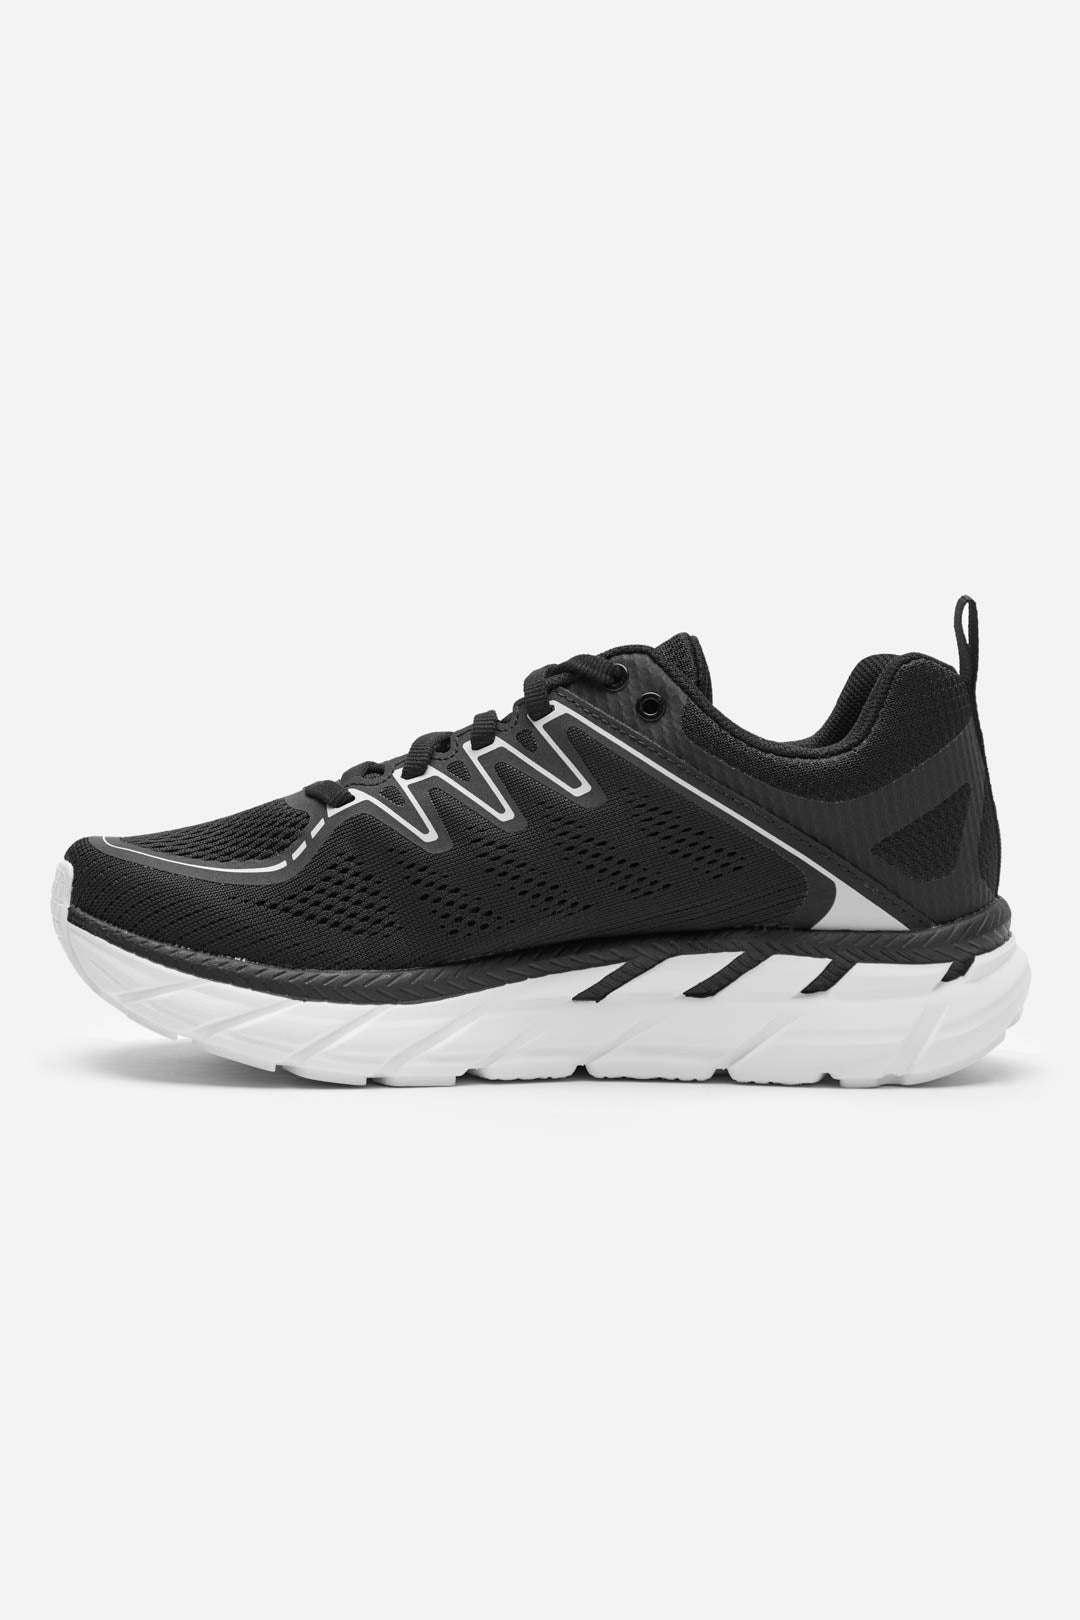 Black/White Endorphin RX1 Shoes - for dame - Famme - Shoes